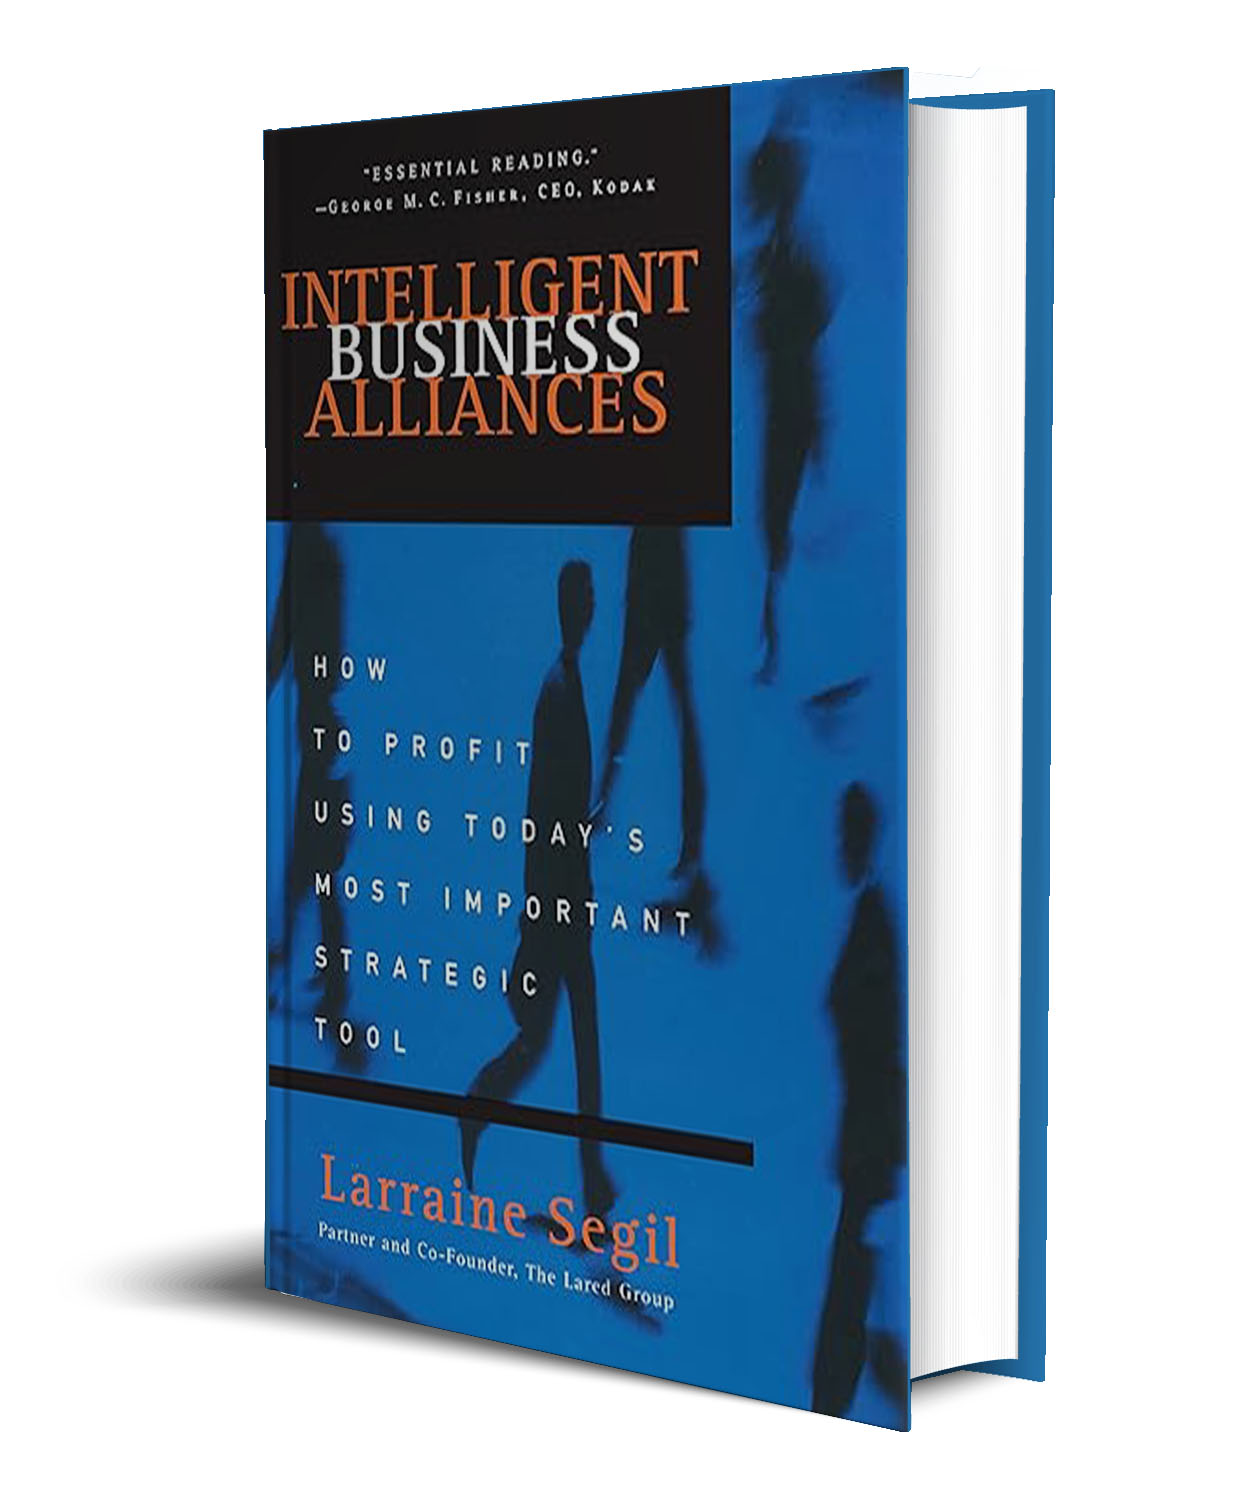 Intelligent Business Alliances: How to Profit Using Today’s Most Important Strategic Tool